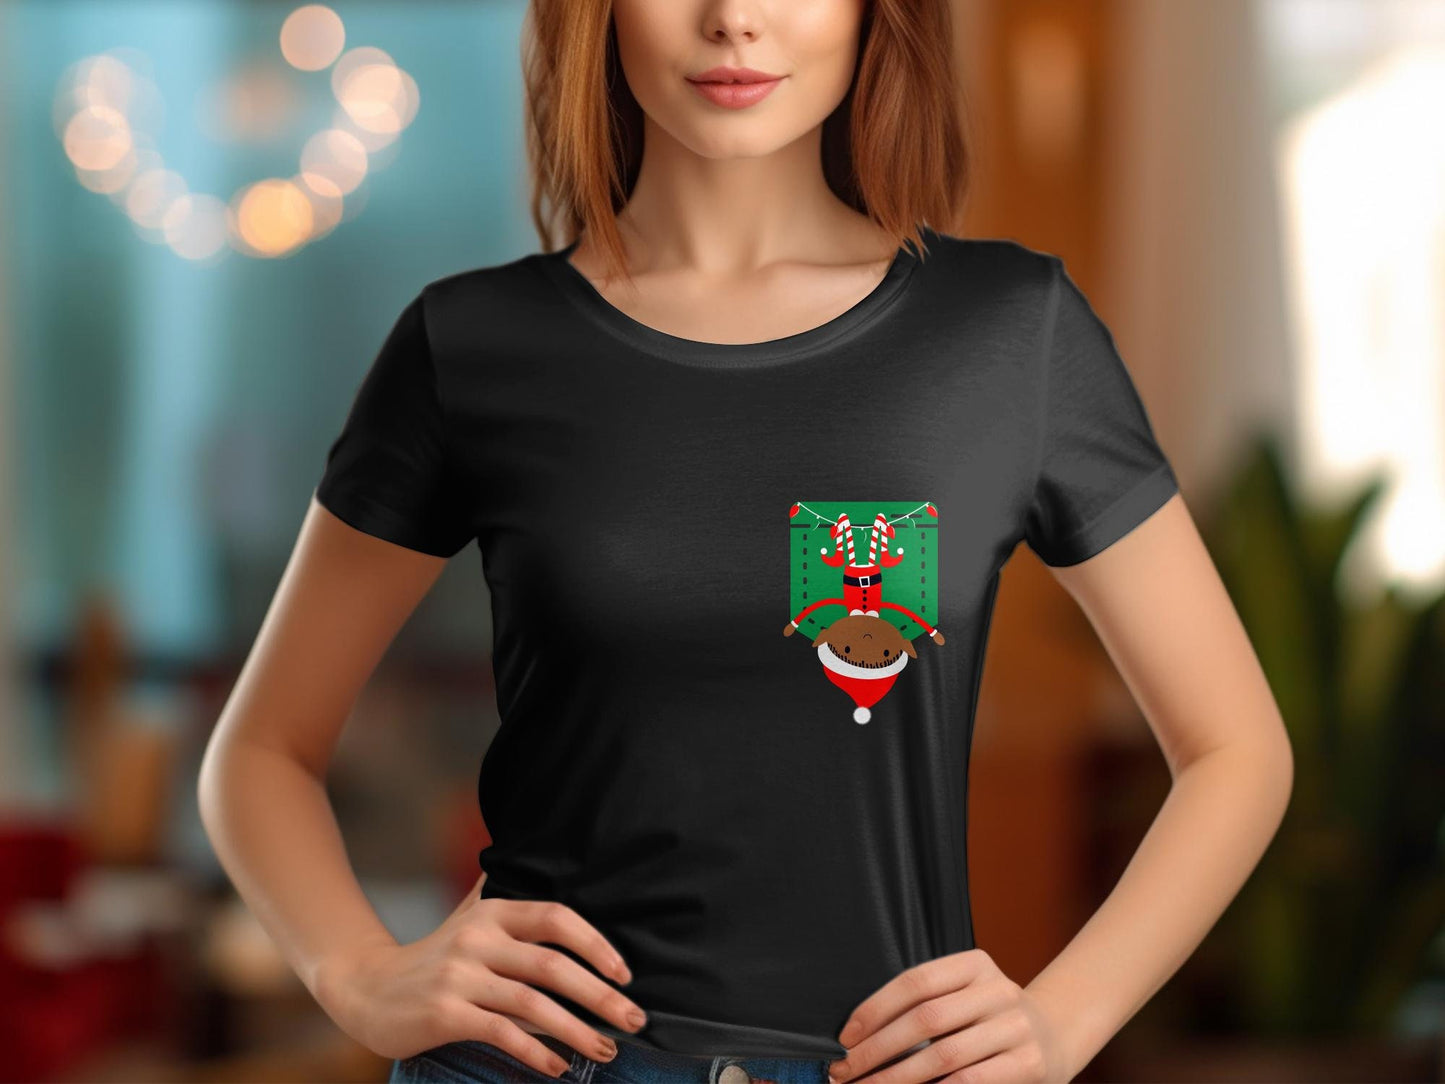 Christmas Boy Elf in a Pocket Shirt - Holiday Xmas Elf Funny Tee, Christmas Gift for Family, Winter Tee